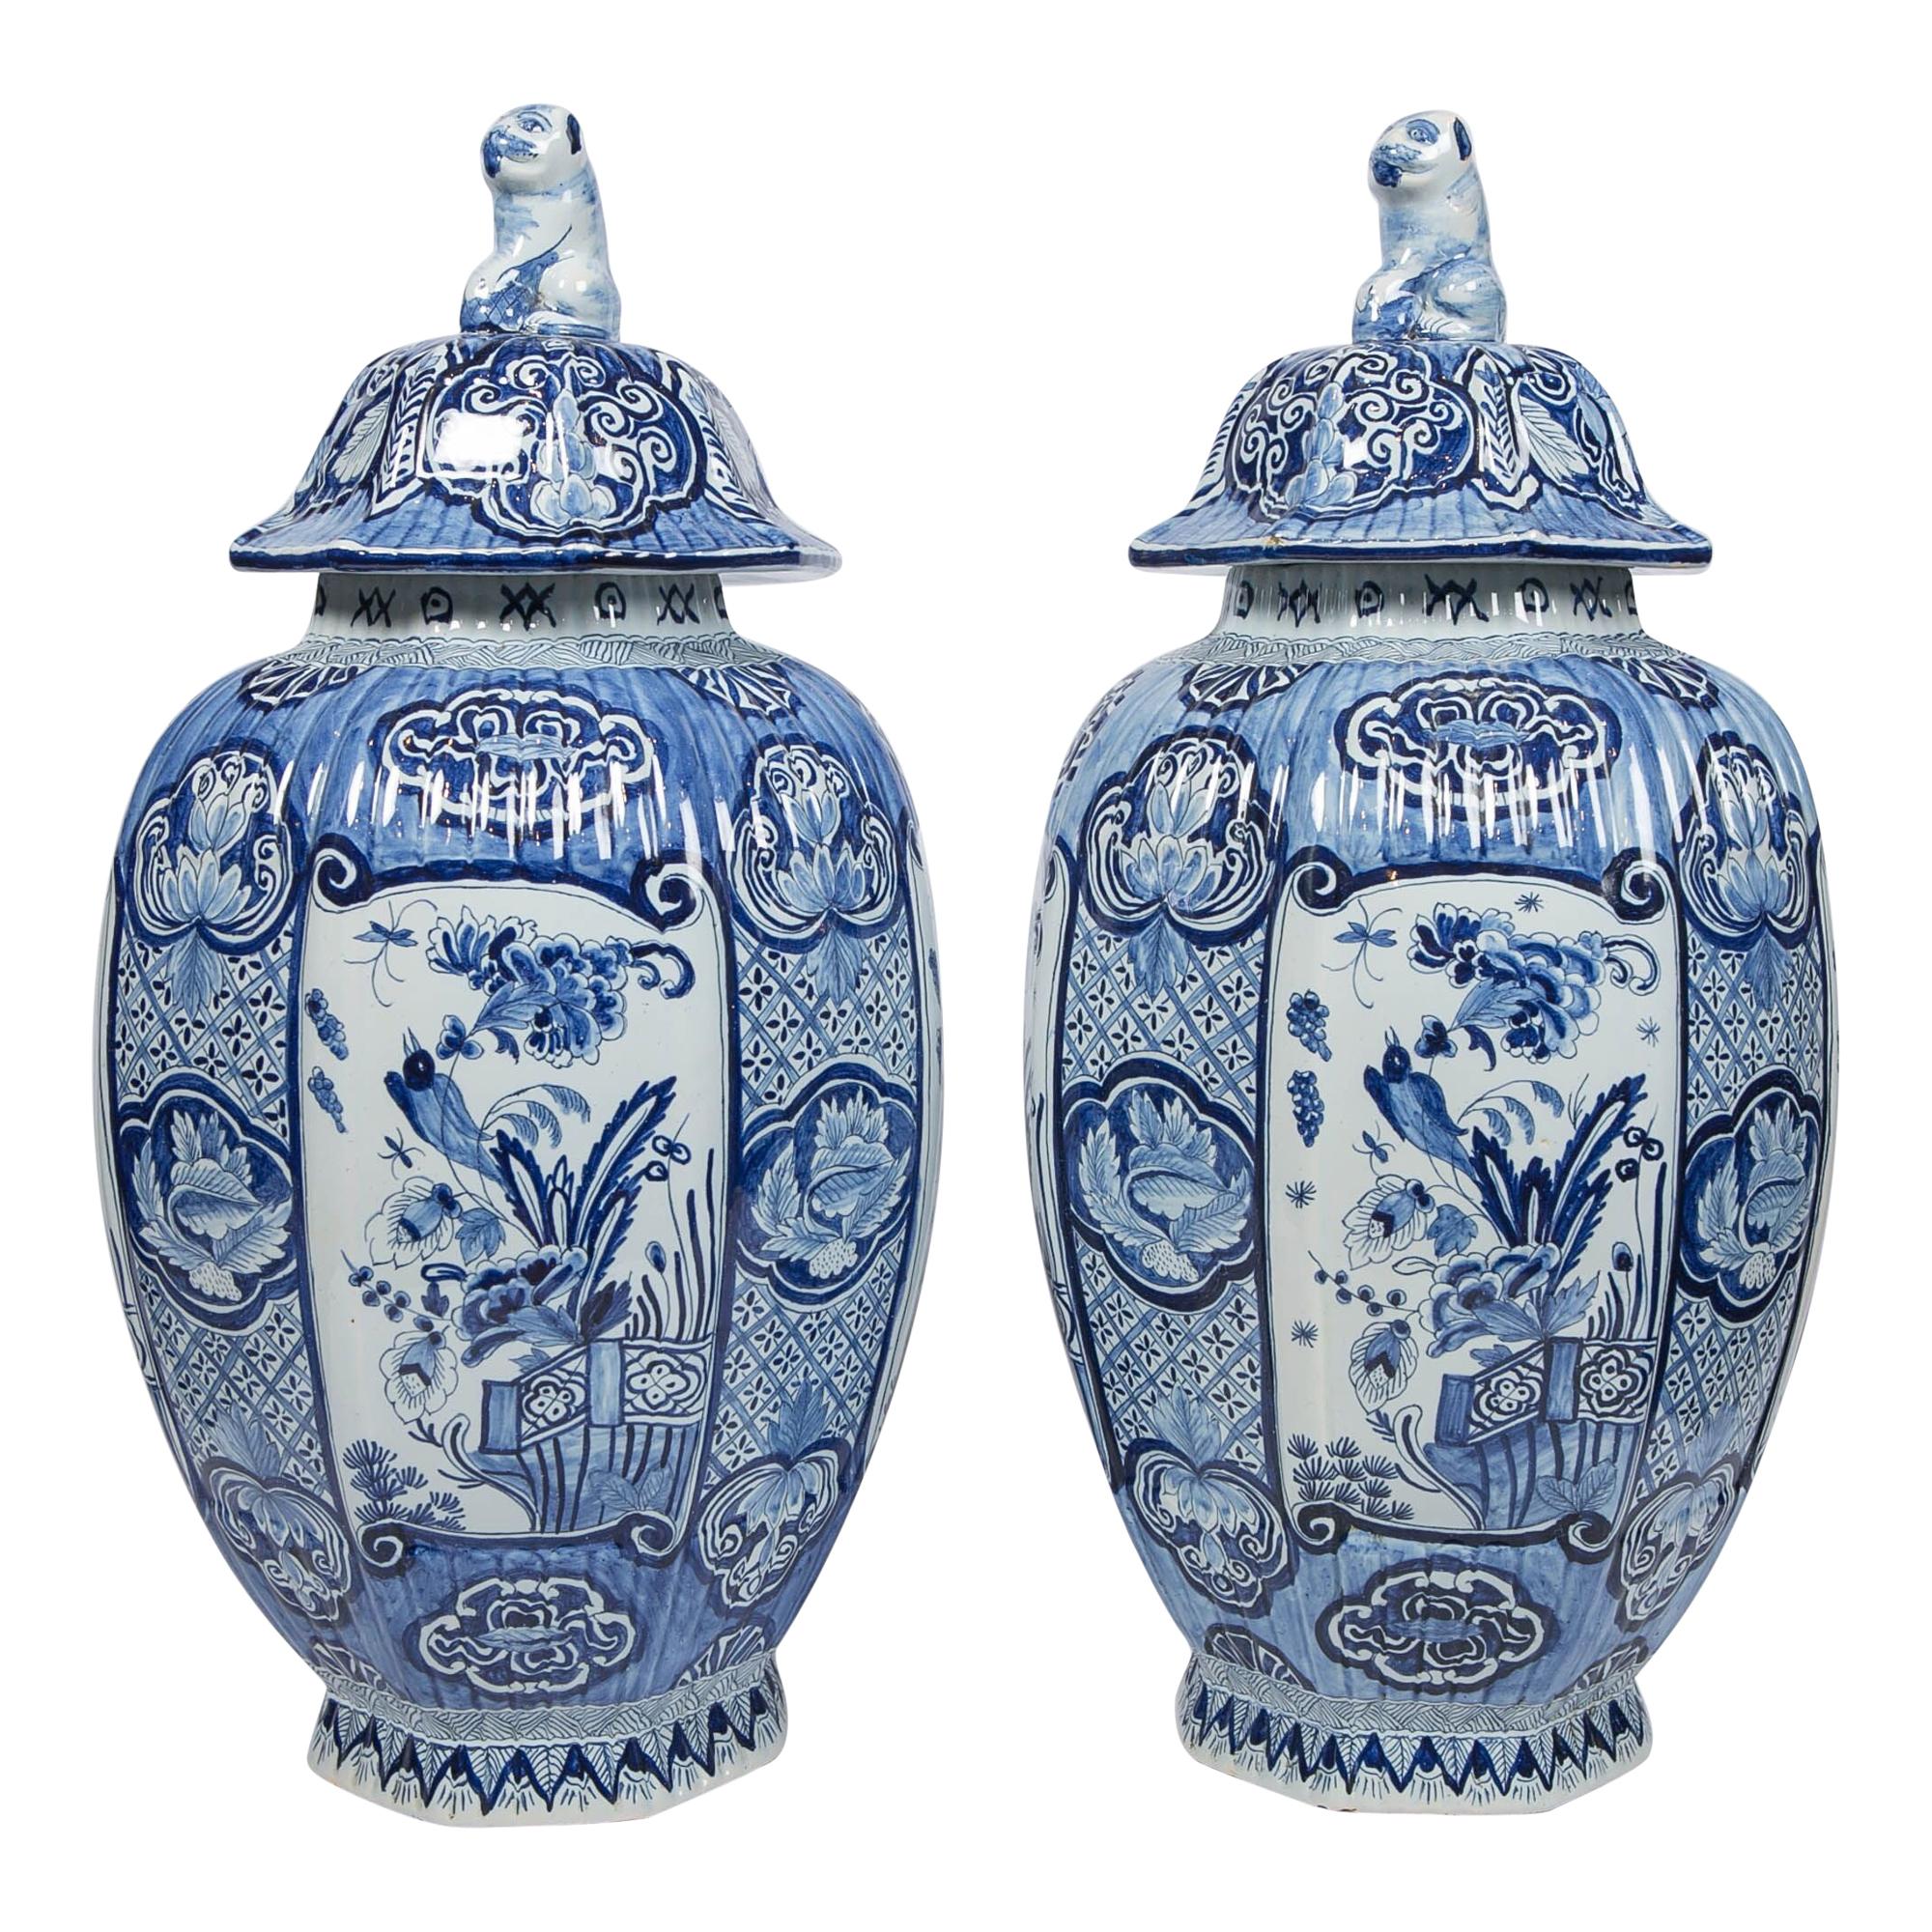  Large Pair of Delft Blue and White Ginger Jars